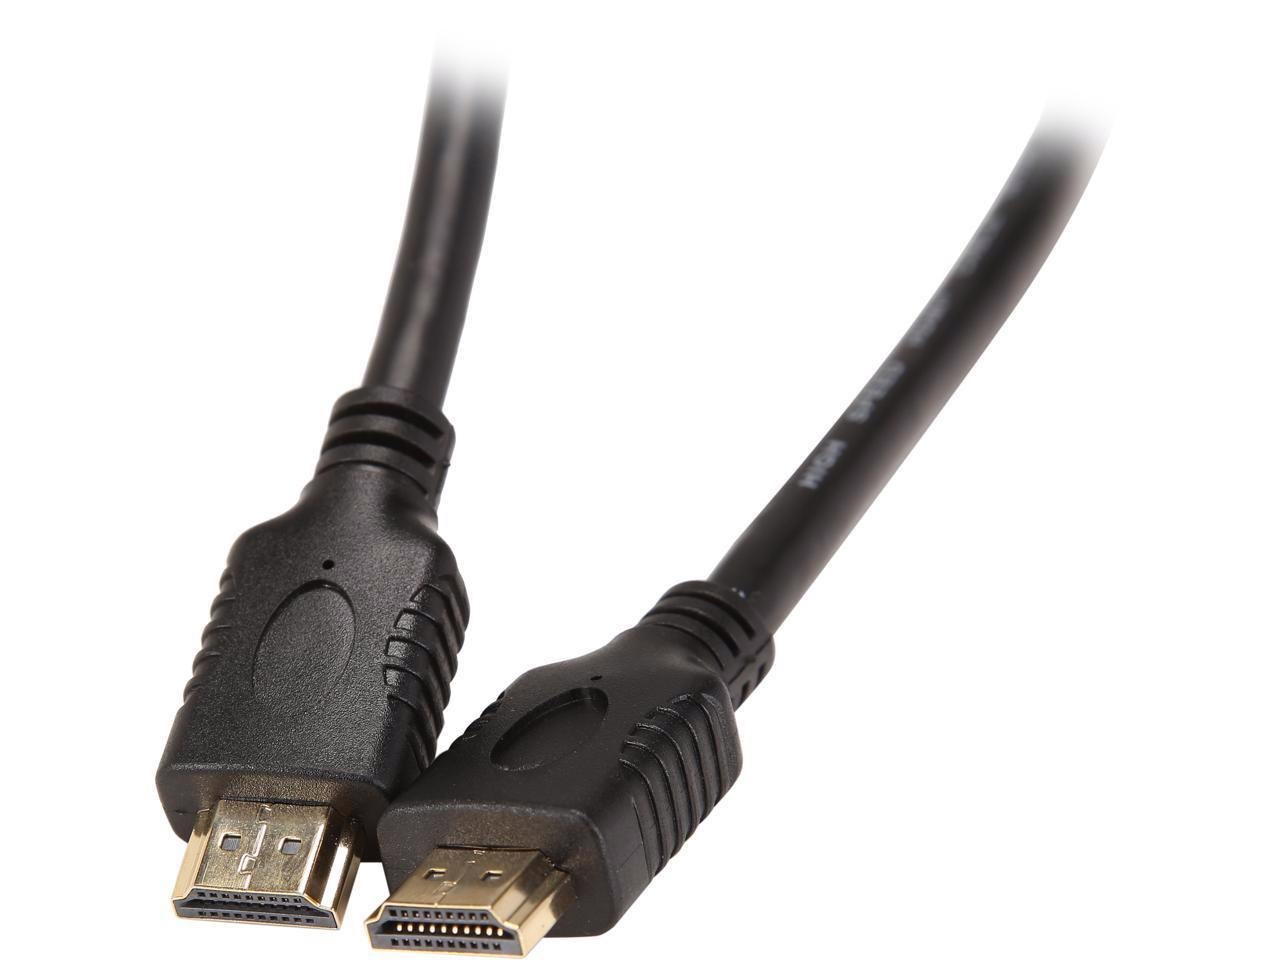 Nippon Labs 20Hdmi-3Ftmm-C 4K Hdmi Cable 3FT. Hdmi 2.0 Cable